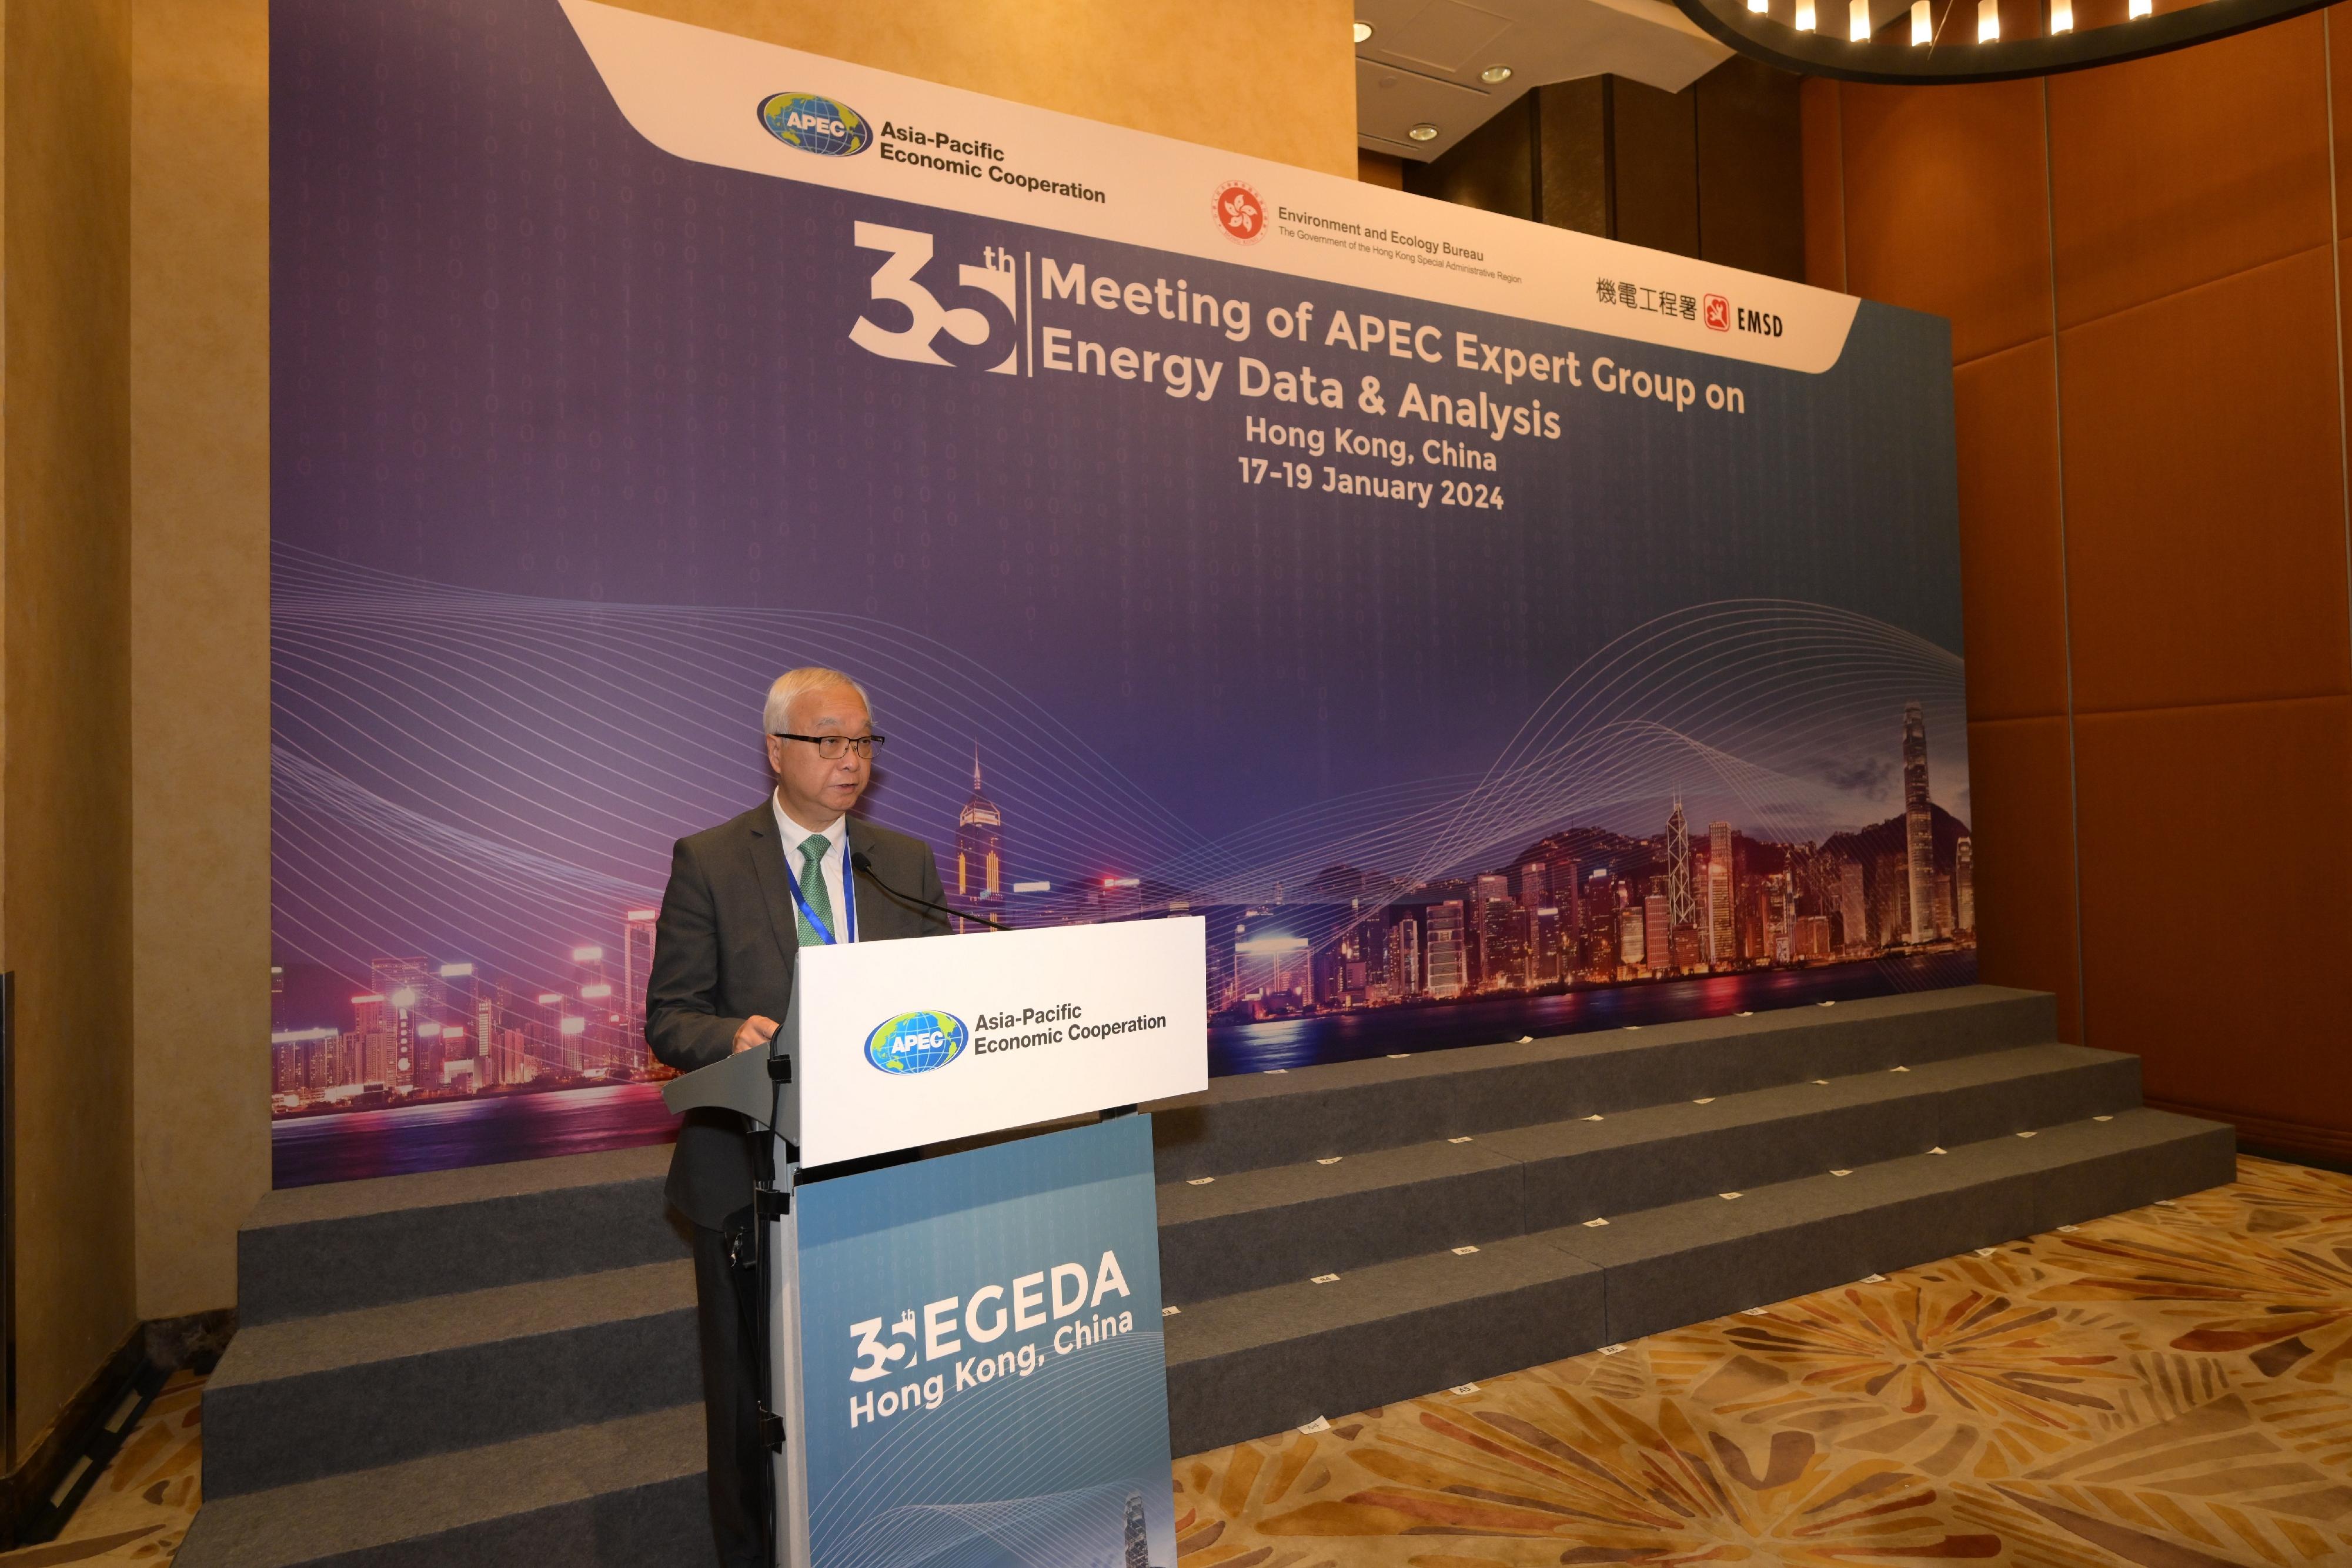 The 35th Meeting of the Asia-Pacific Economic Cooperation Expert Group on Energy Data and Analysis is being held in Hong Kong today and tomorrow (January 17 and 18). Photo shows the Secretary for Environment and Ecology, Mr Tse Chin-wan, delivering the welcome speech.